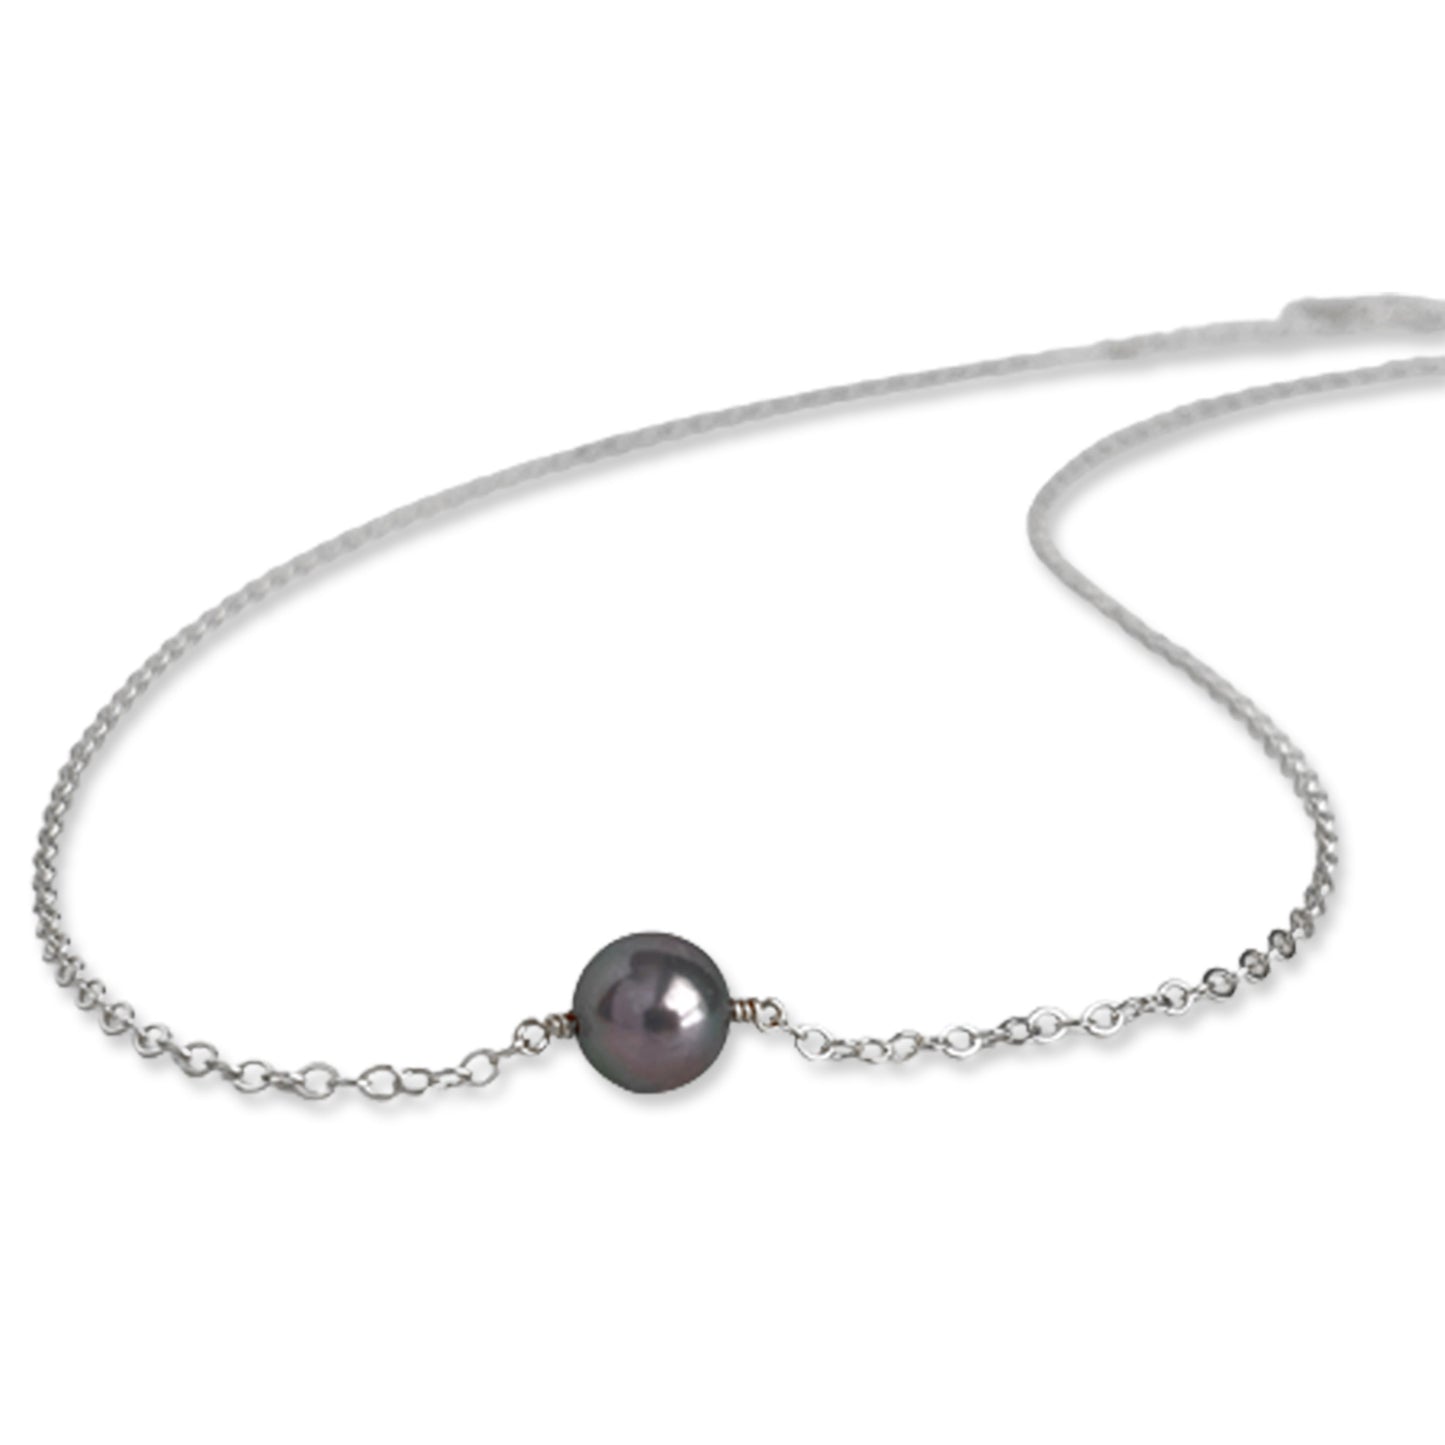 Black Floating Pearl Necklace - Single Pearl Necklace